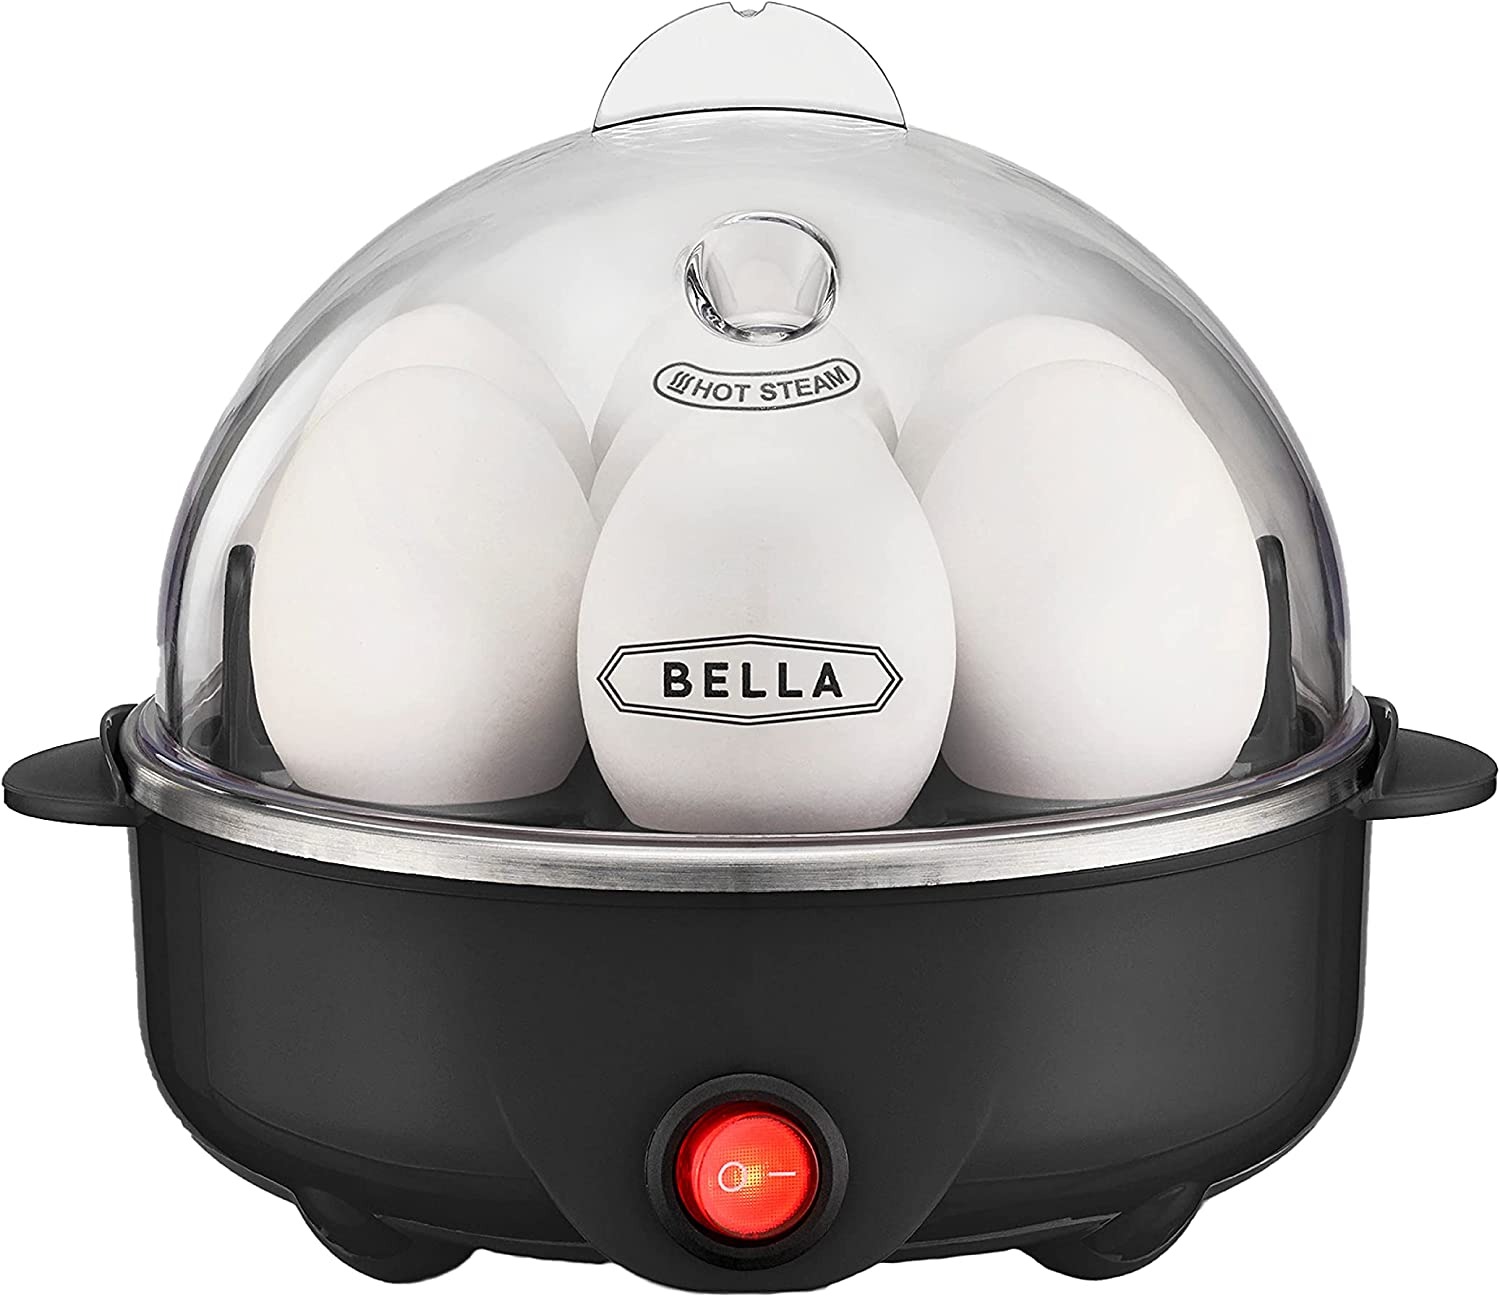 Egg Cookers 5